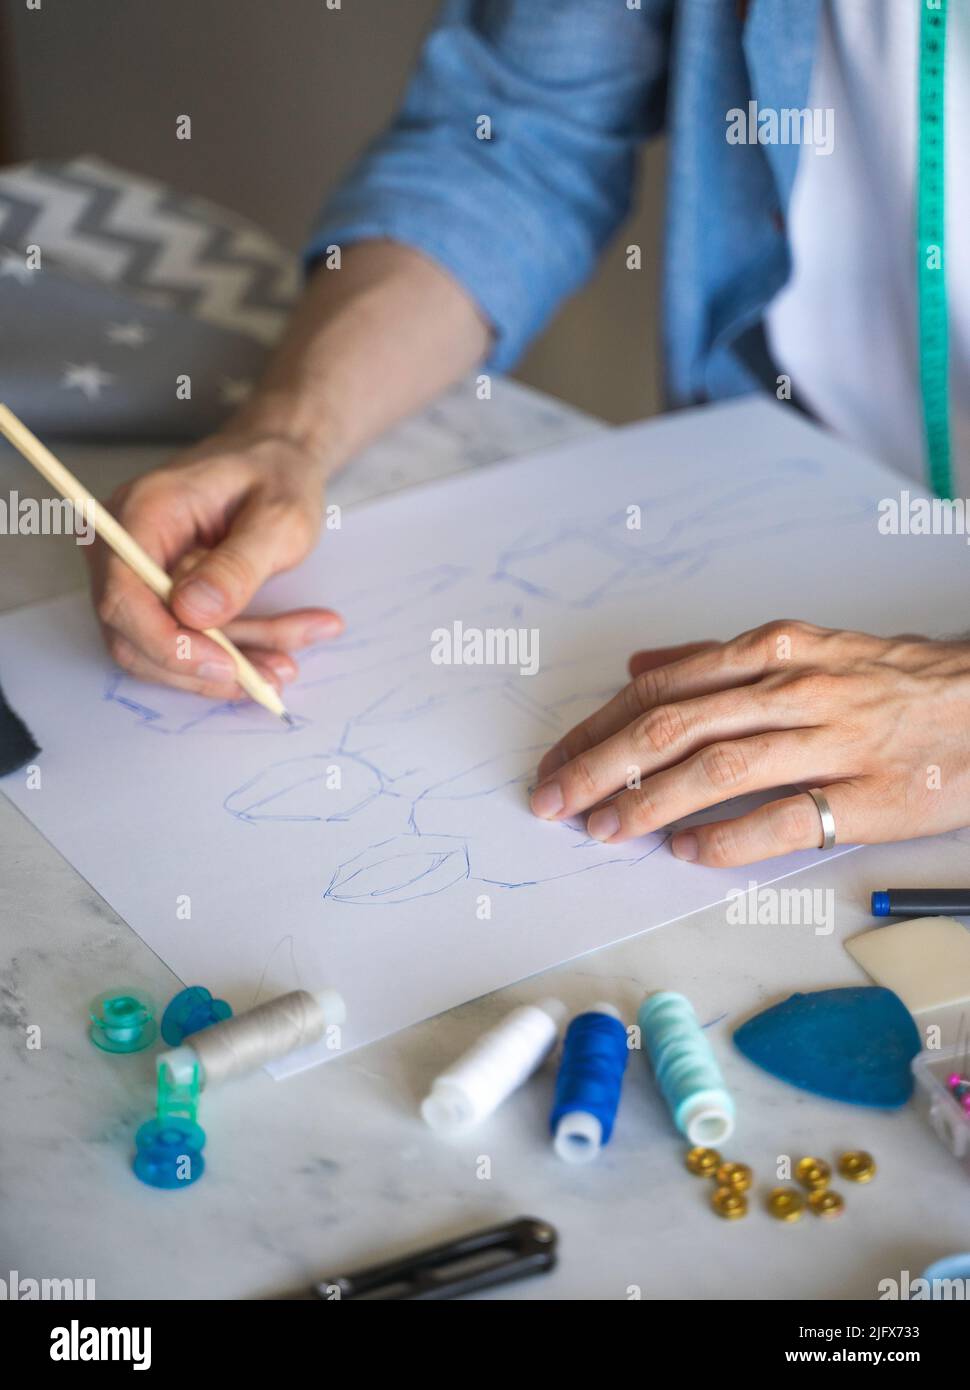 The self-taught tailor's hands are on his sketch. Hand with pencil. A DIY designer draws a sketch for a new costume project. Close up, selective focus Stock Photo